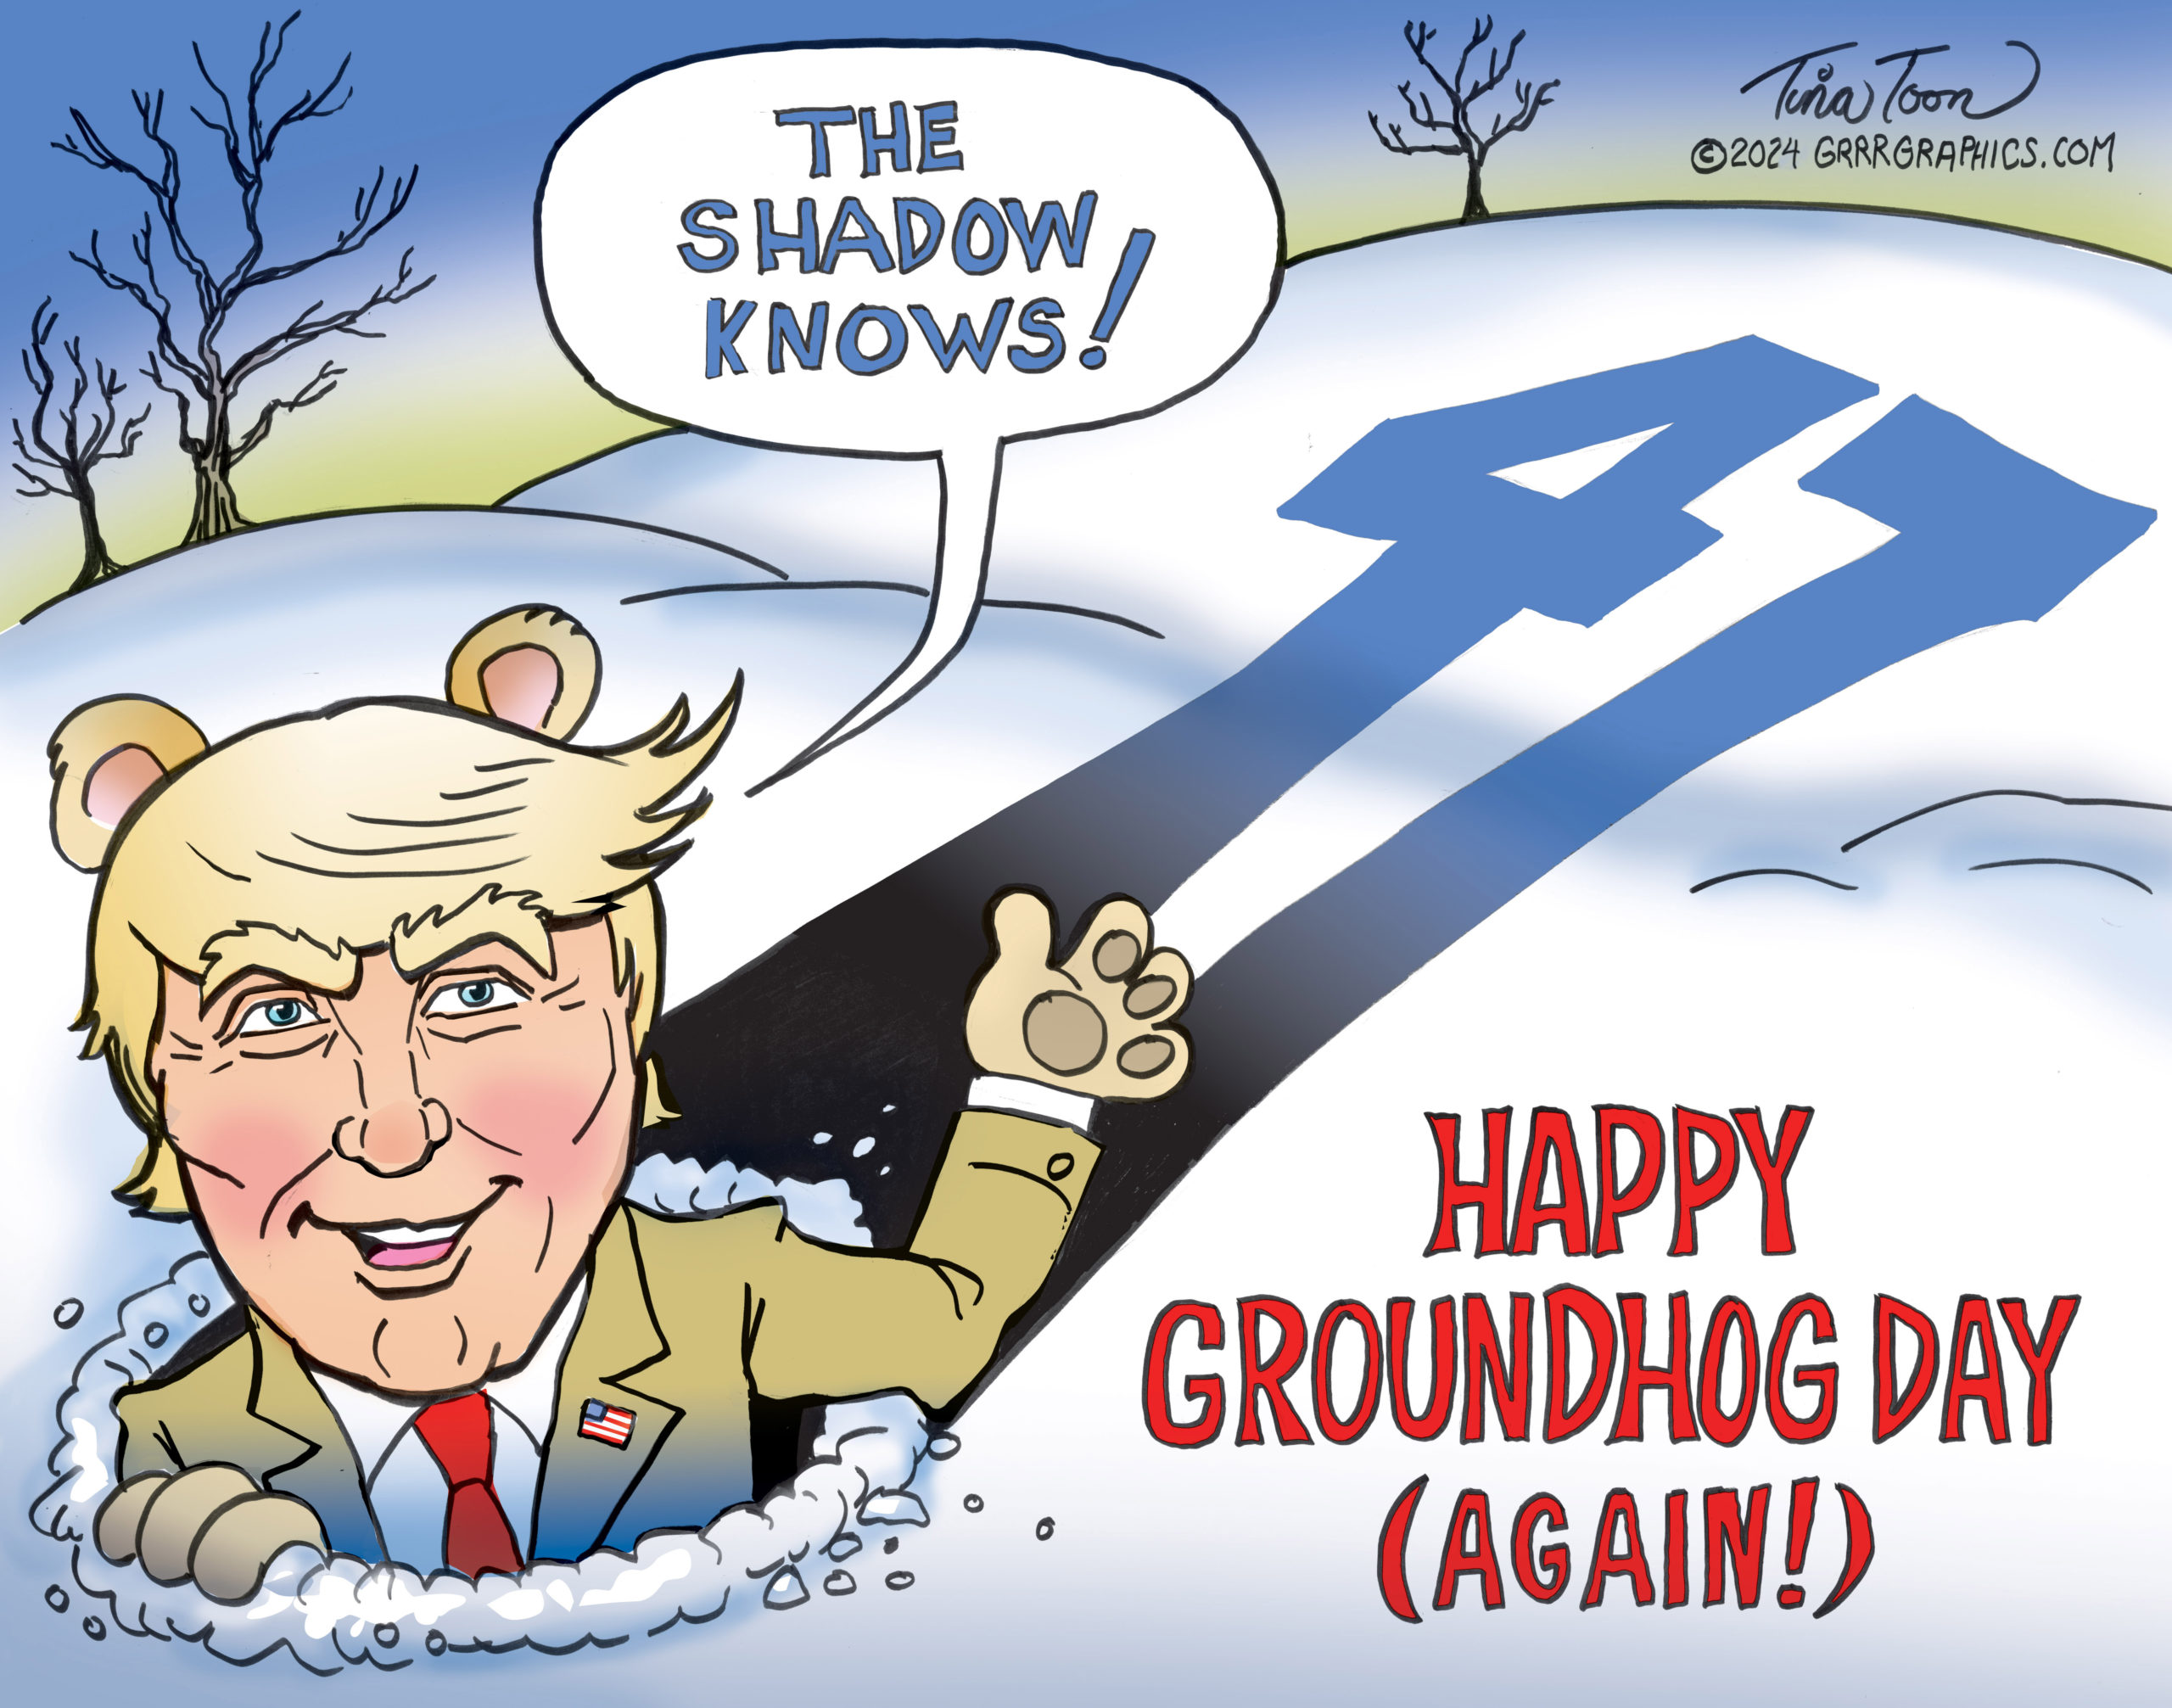 The Shadow Knows, Groundhog Day 2024 GrrrGraphics